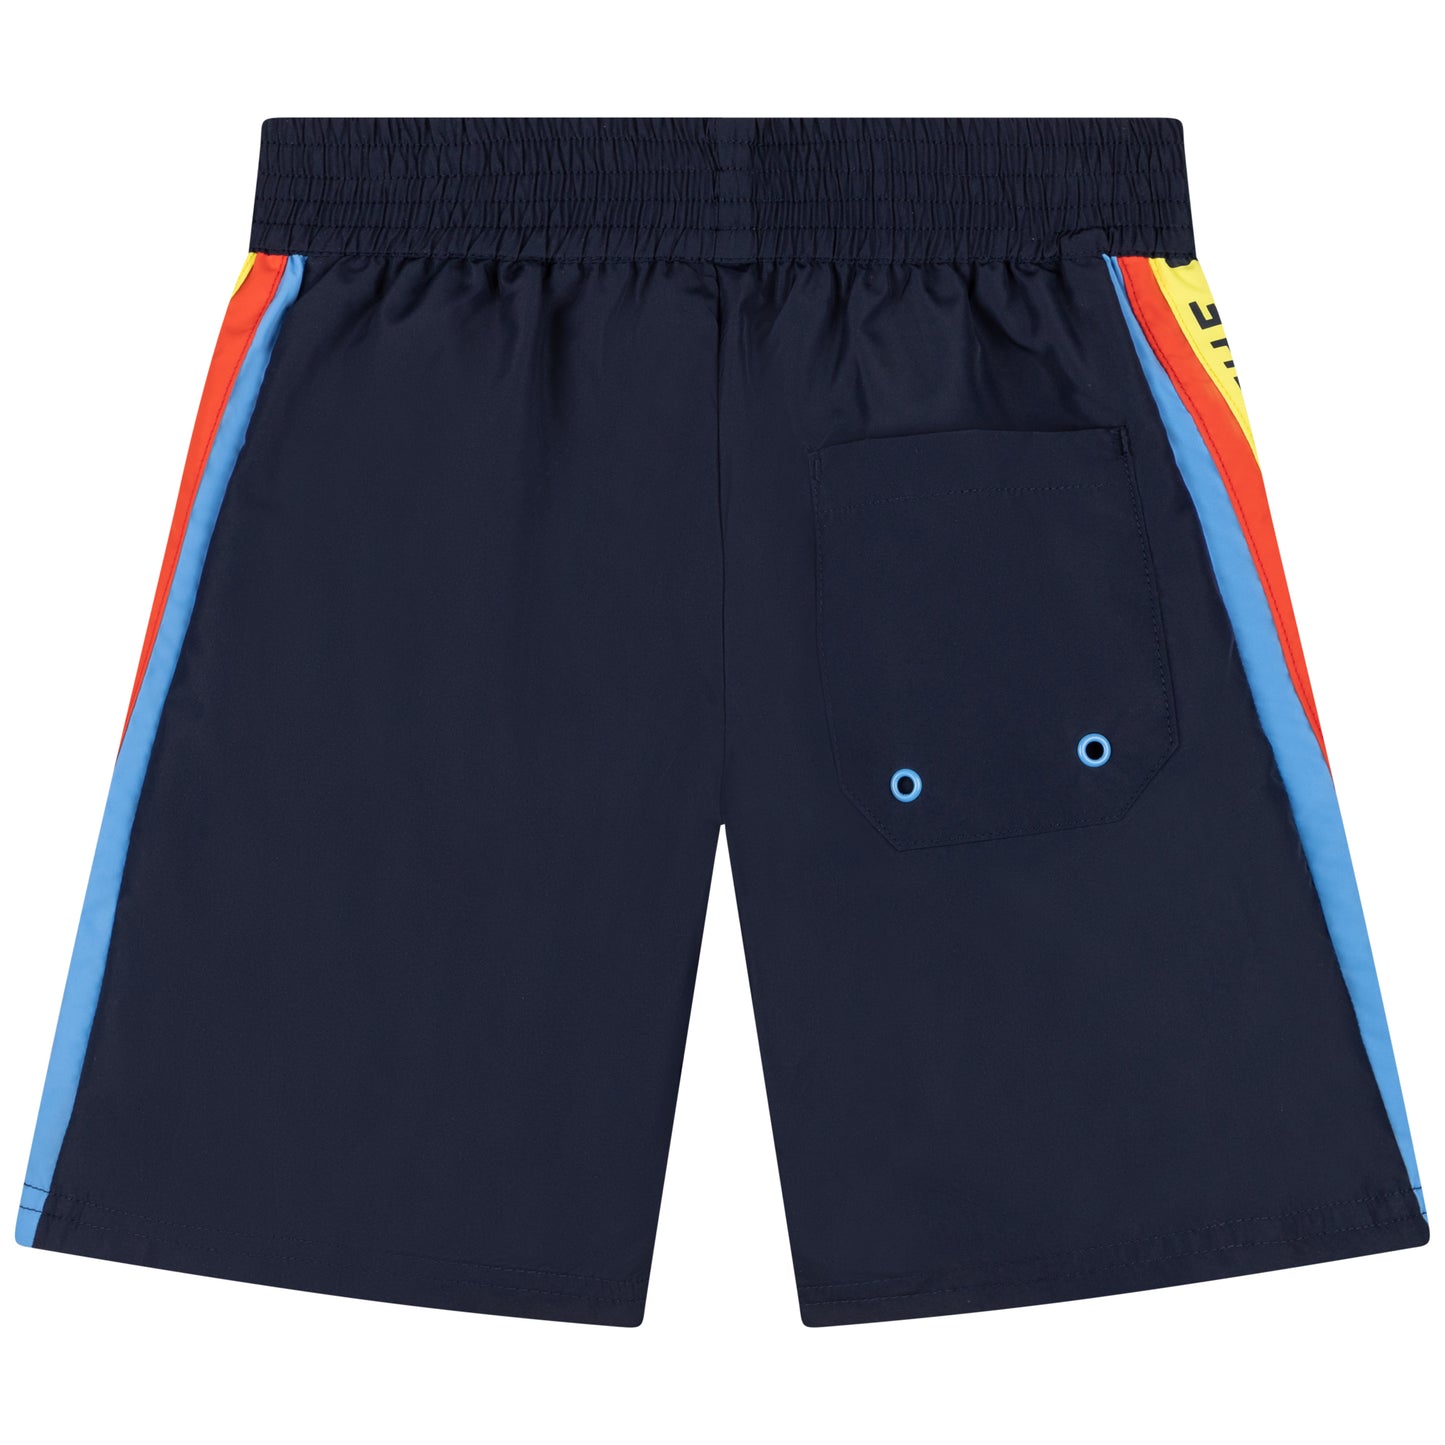 The Marc Jacobs Striped Swimming Shorts